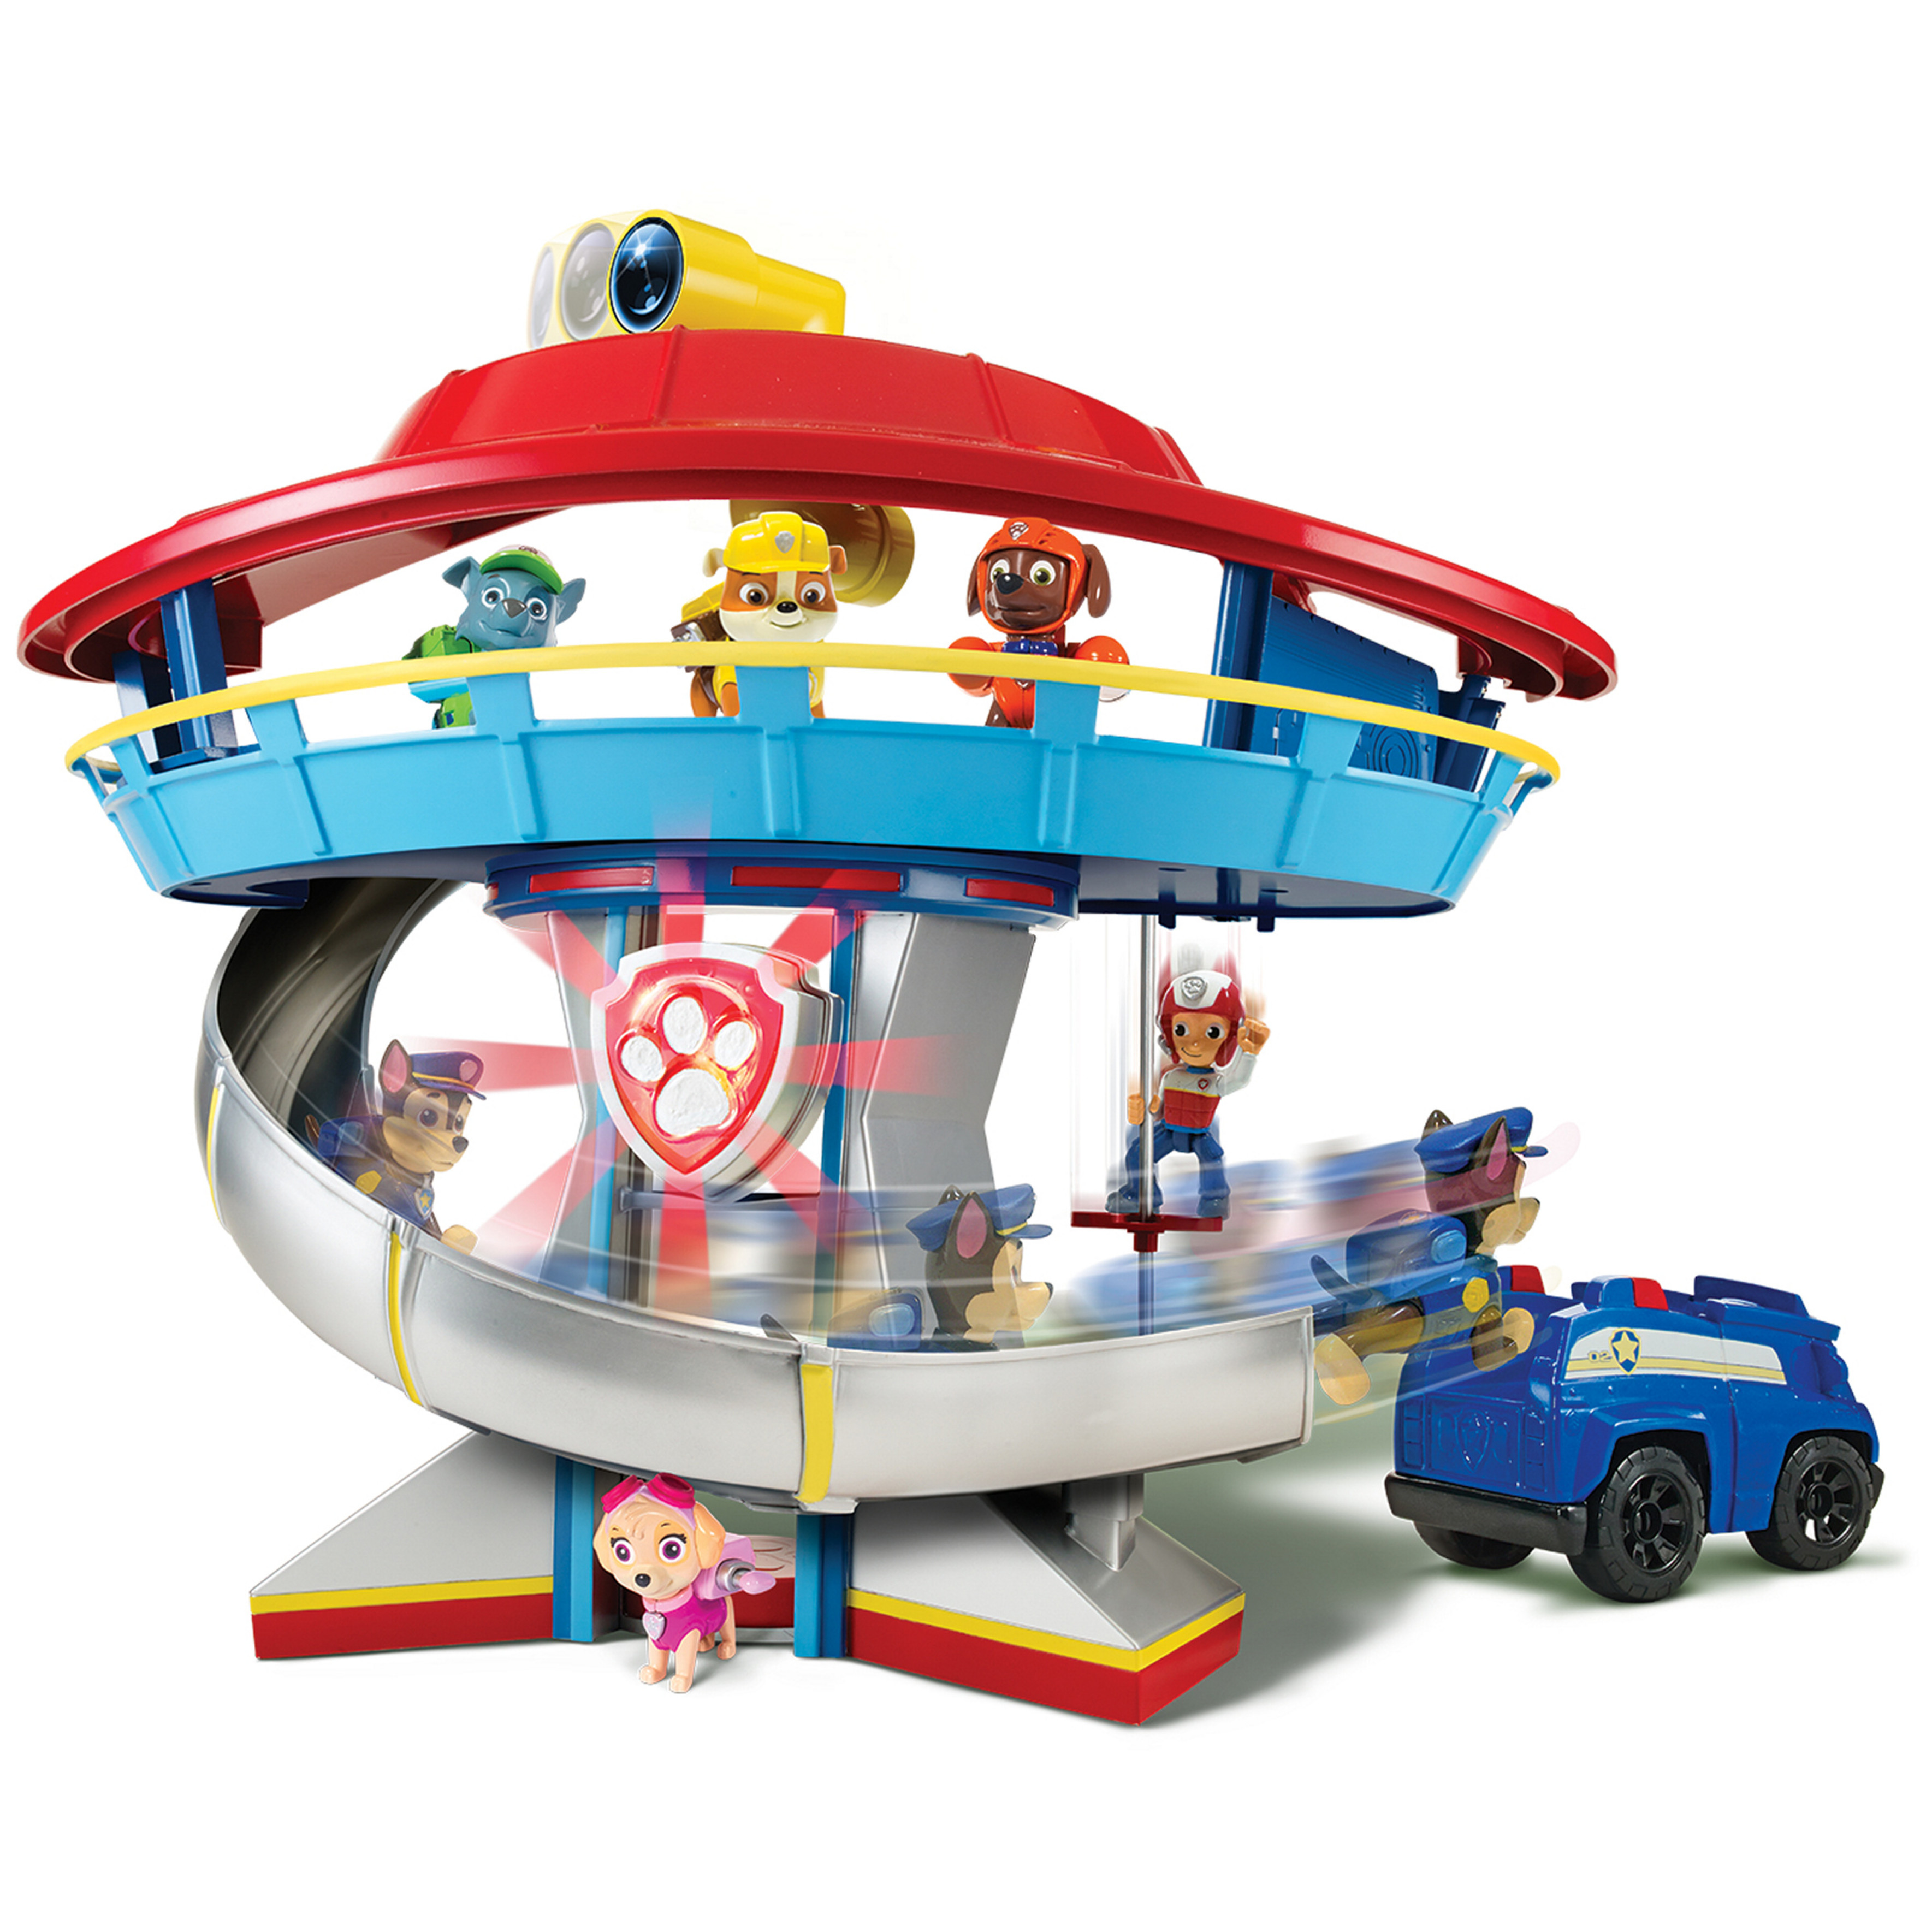 Paw Patrol Look-out Playset, Vehicle and Figure - image 2 of 6